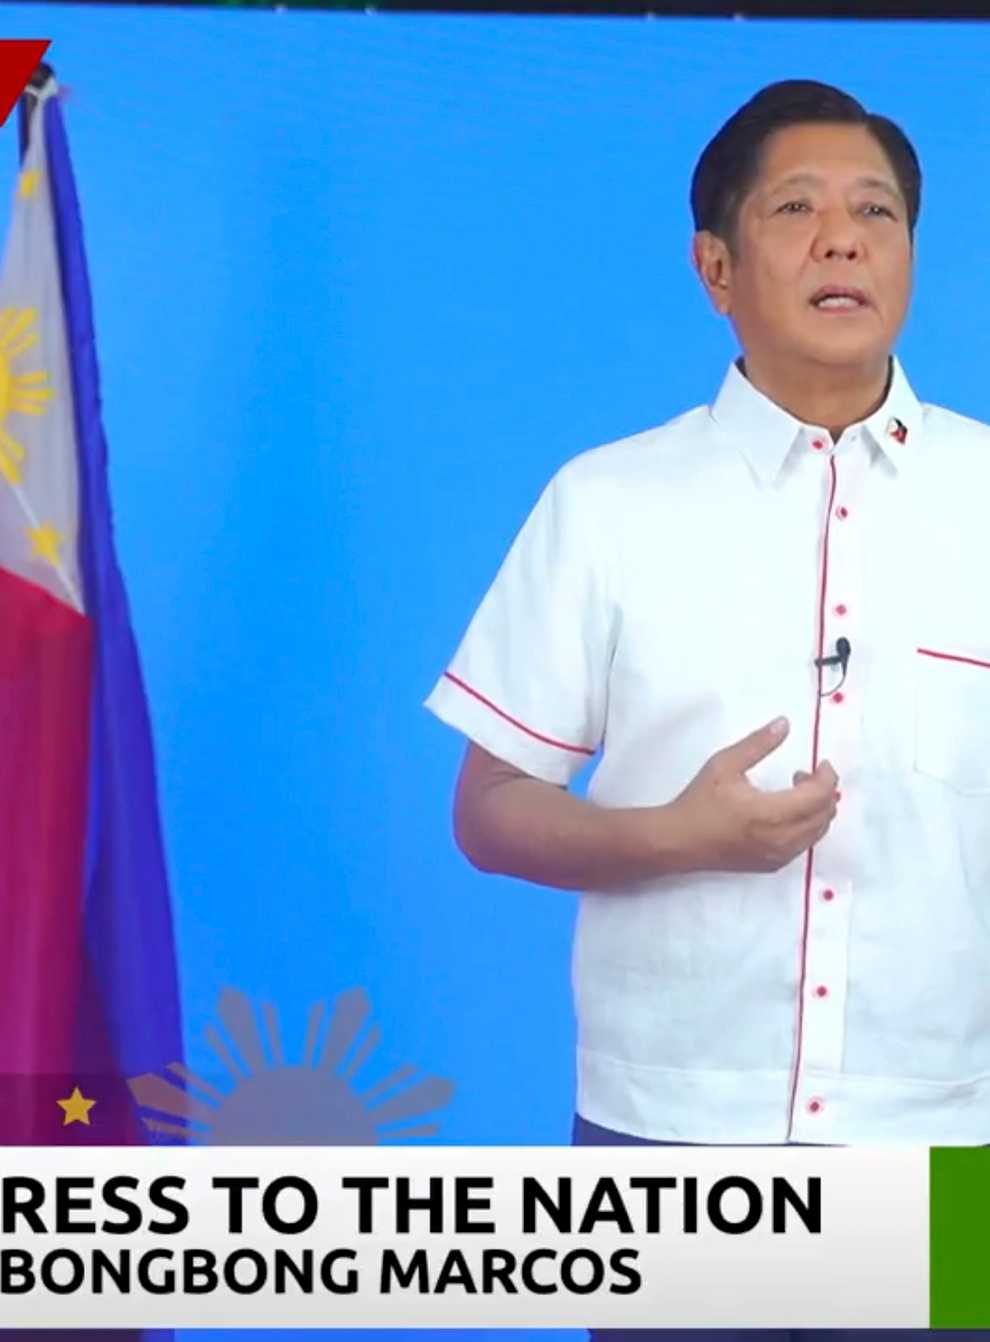 In this image from video posted on the Bongbong Marcos Facebook page, presidential candidate and former senator Ferdinand Marcos Jr. issues a statement to the media on Monday, May 9, 2022 in Manila, Philippines. The namesake son of late Philippine dictator Ferdinand Marcos appeared to have been elected Philippine president by a landslide in an astonishing reversal of the 1986 “People Power” pro-democracy revolt that booted his father into global infamy. (Bongbong Marcos Facebook page via AP)